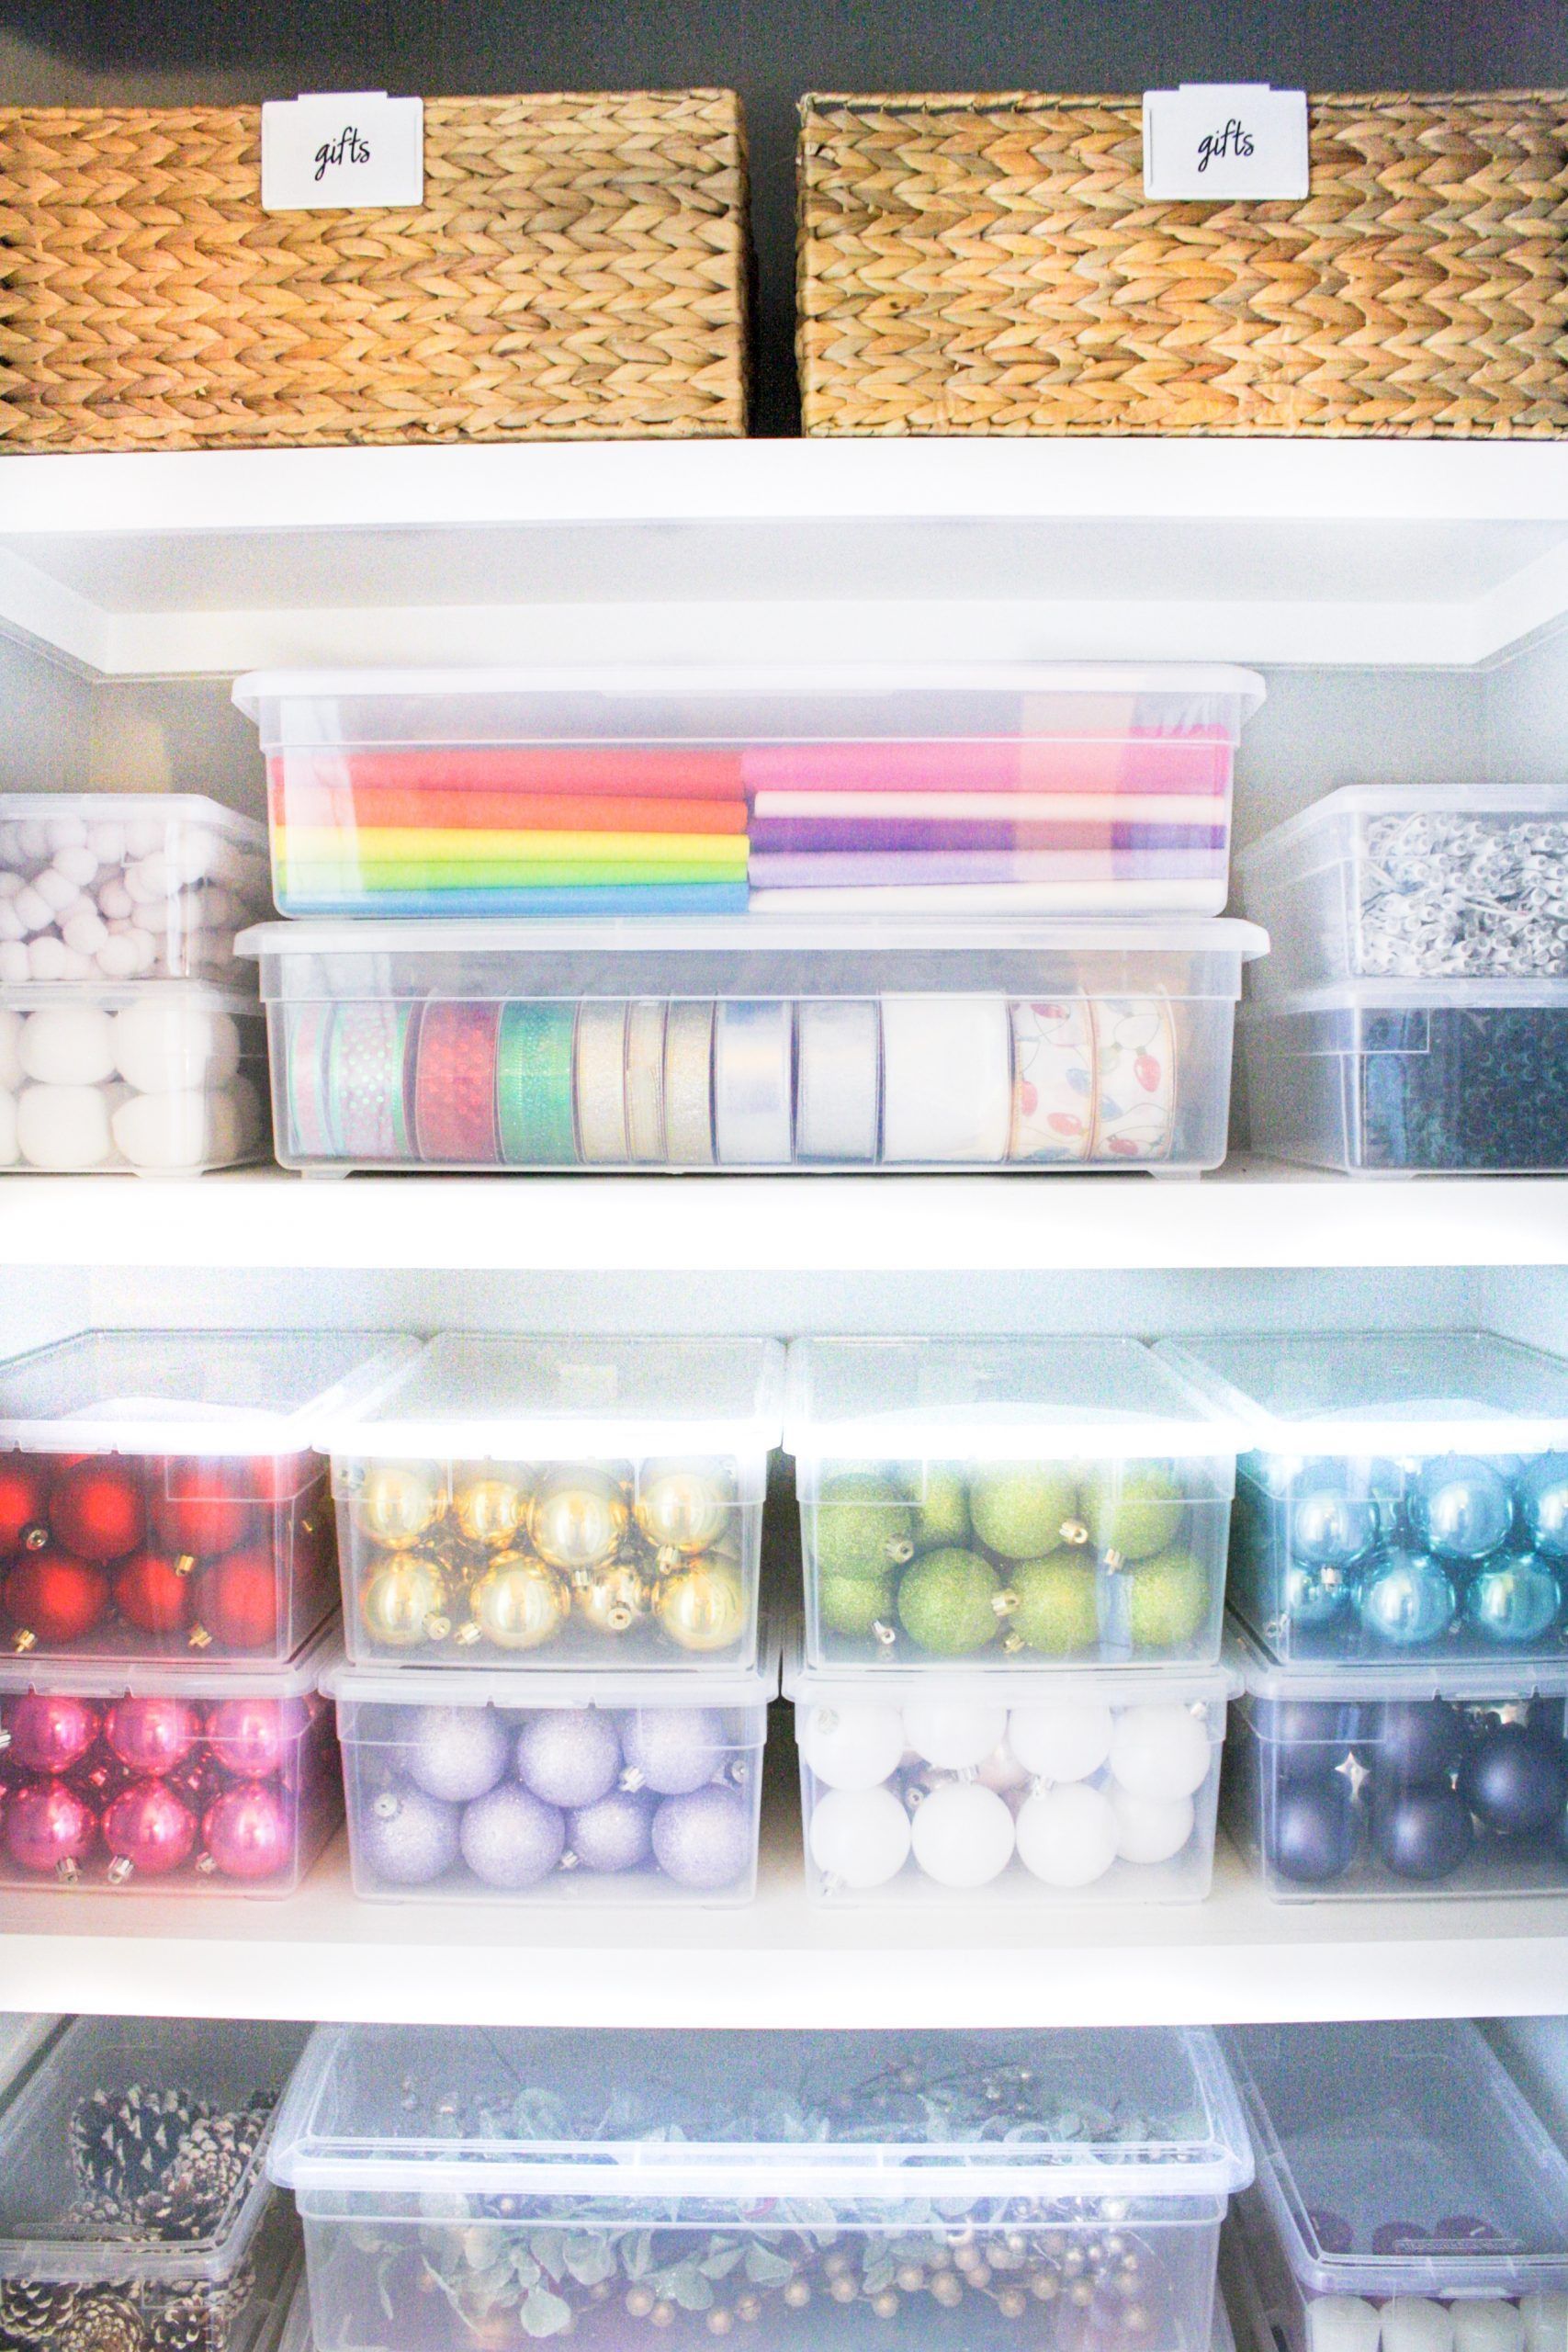 How to Organize a Gifting Closet - The Home Edit -   19 the home edit organization closet ideas